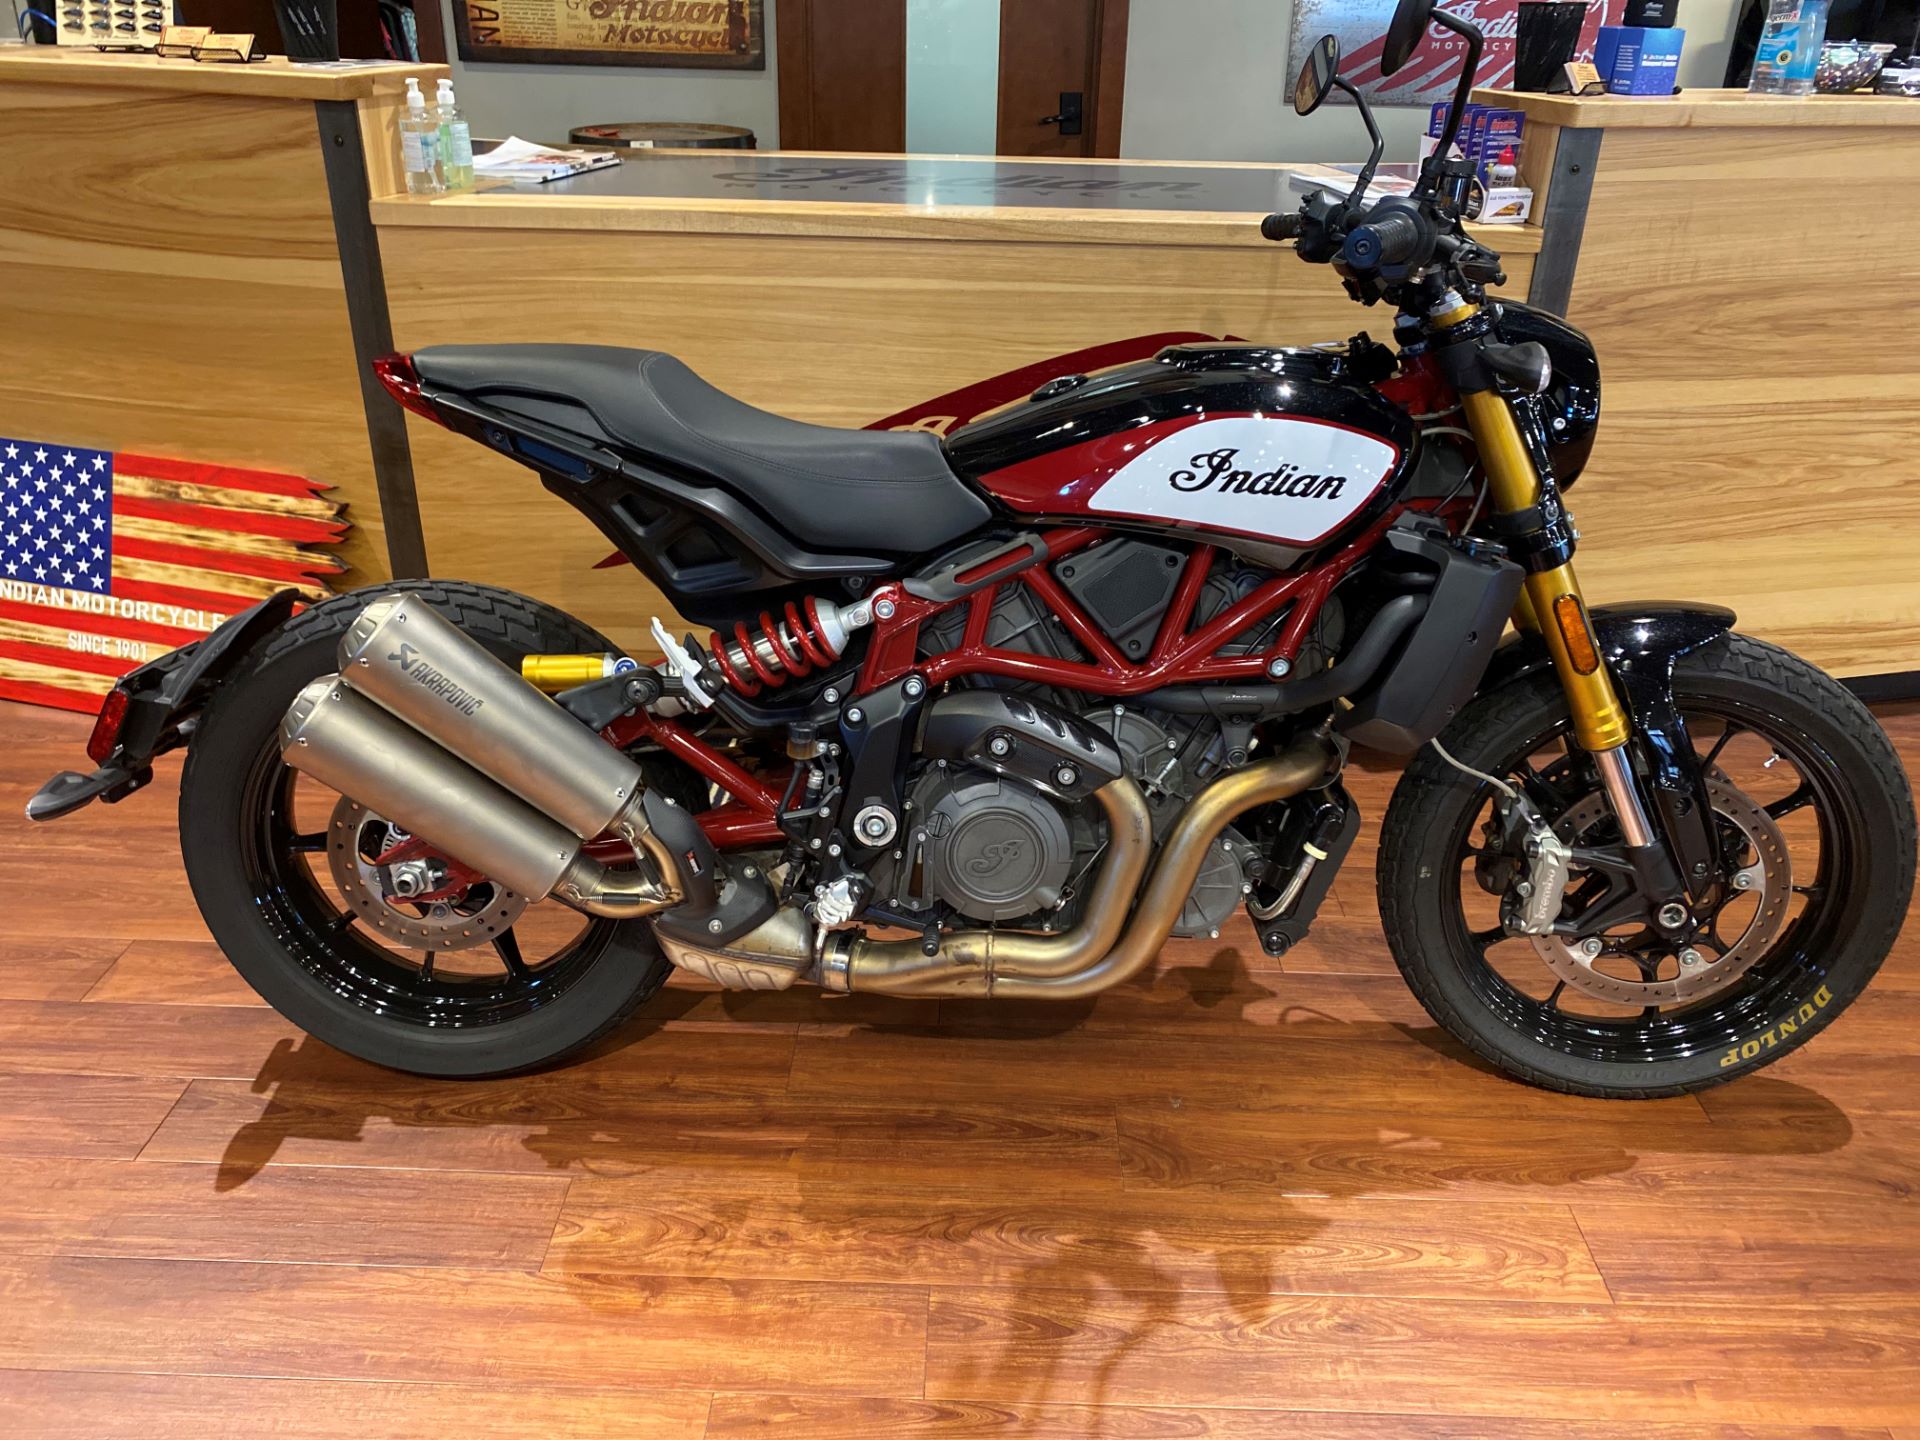 2019 Indian FTR™ 1200 S in Elkhart, Indiana - Photo 1